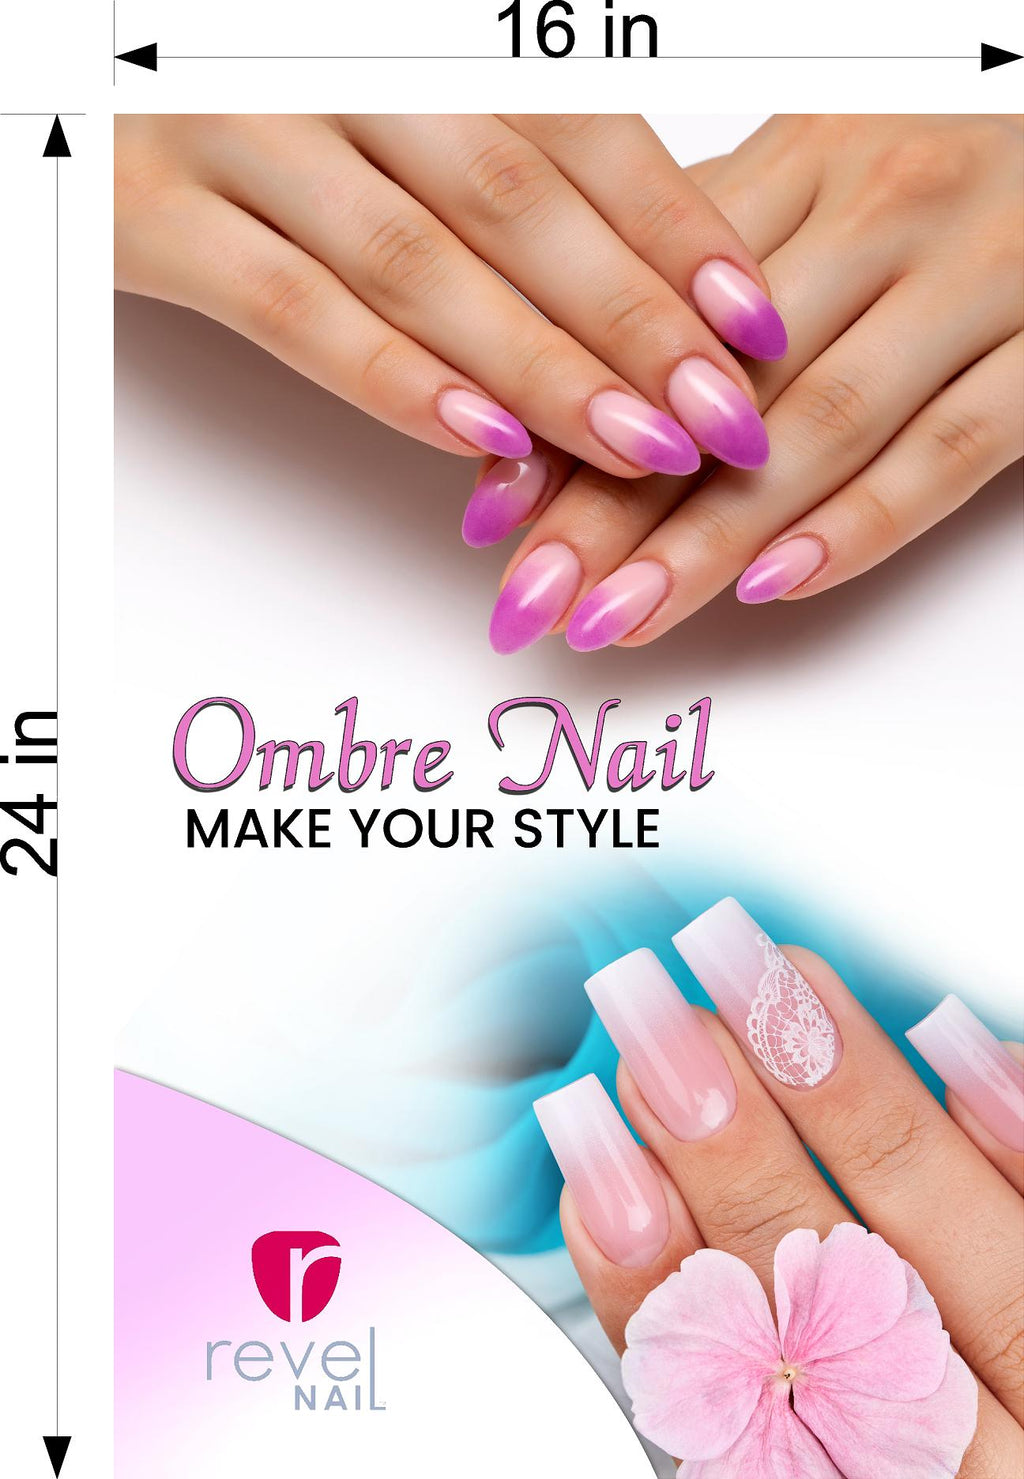 Ombre Nails 06 Window Decal Interior/Exterior Vinyl Adhesive Front BLOCKS Outside Inside View Semitransparent Privacy Vertical